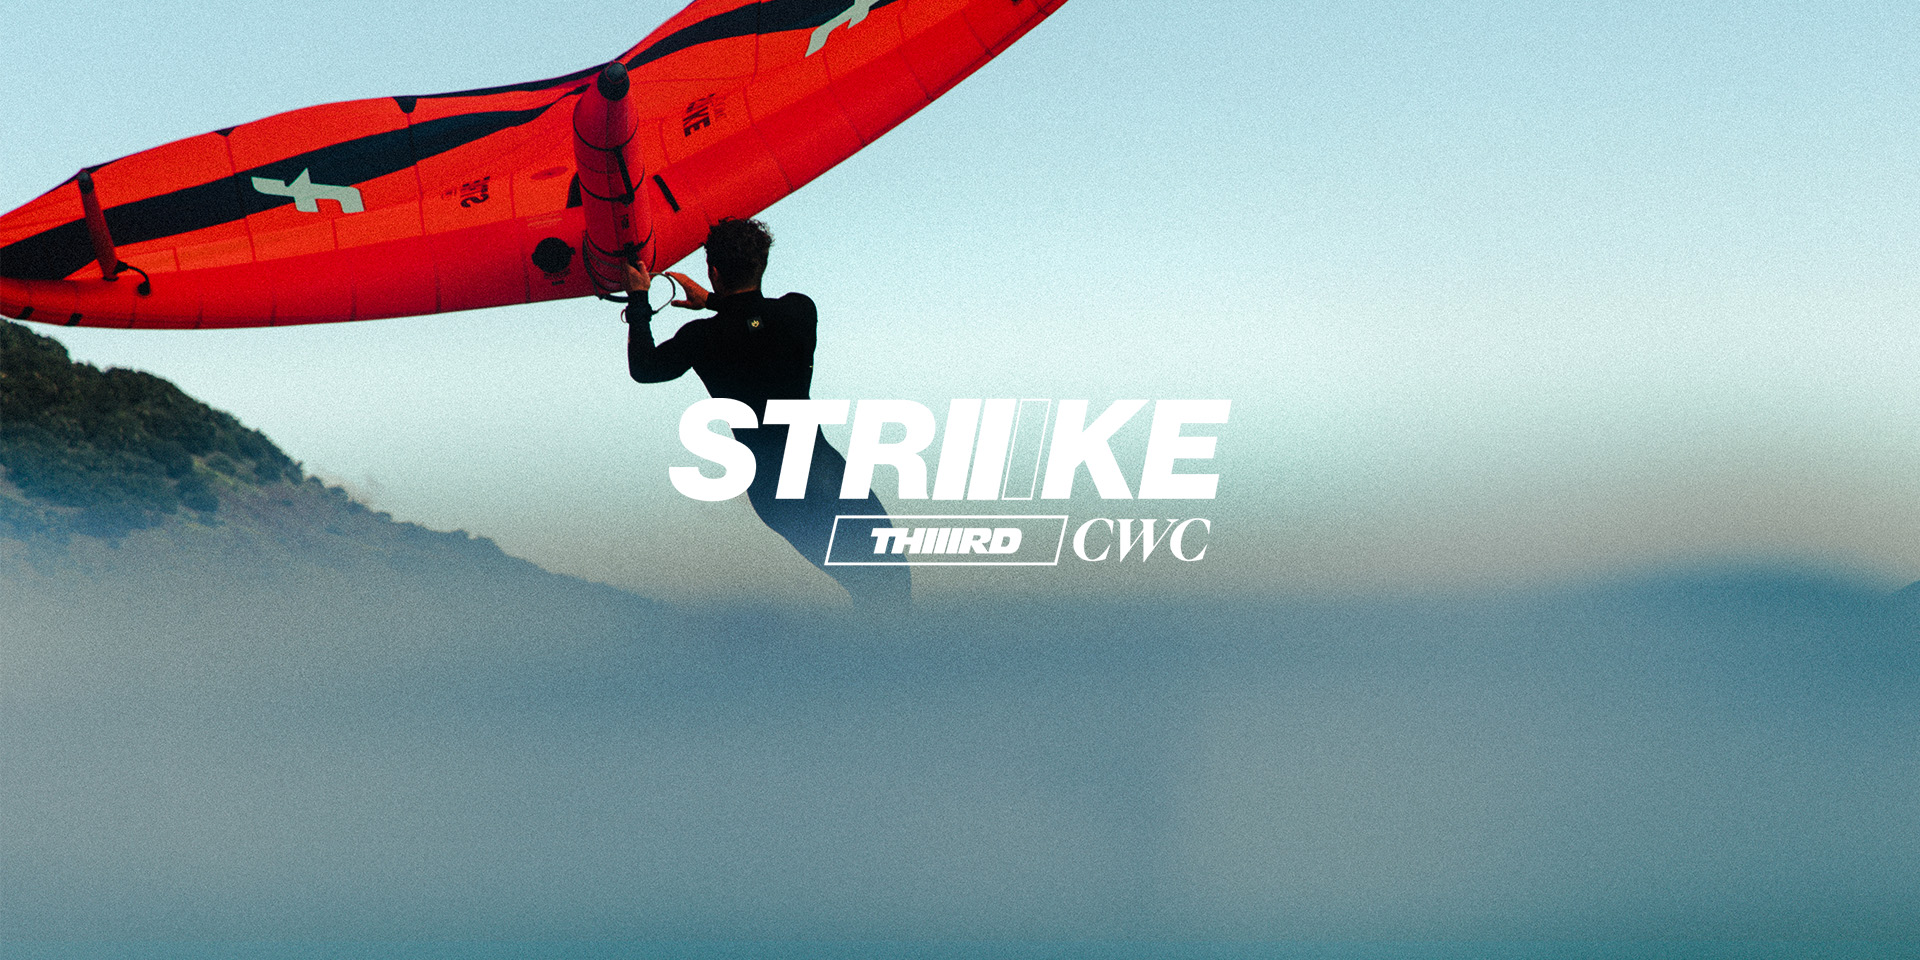 The STRIKE CWC V3 is out 1